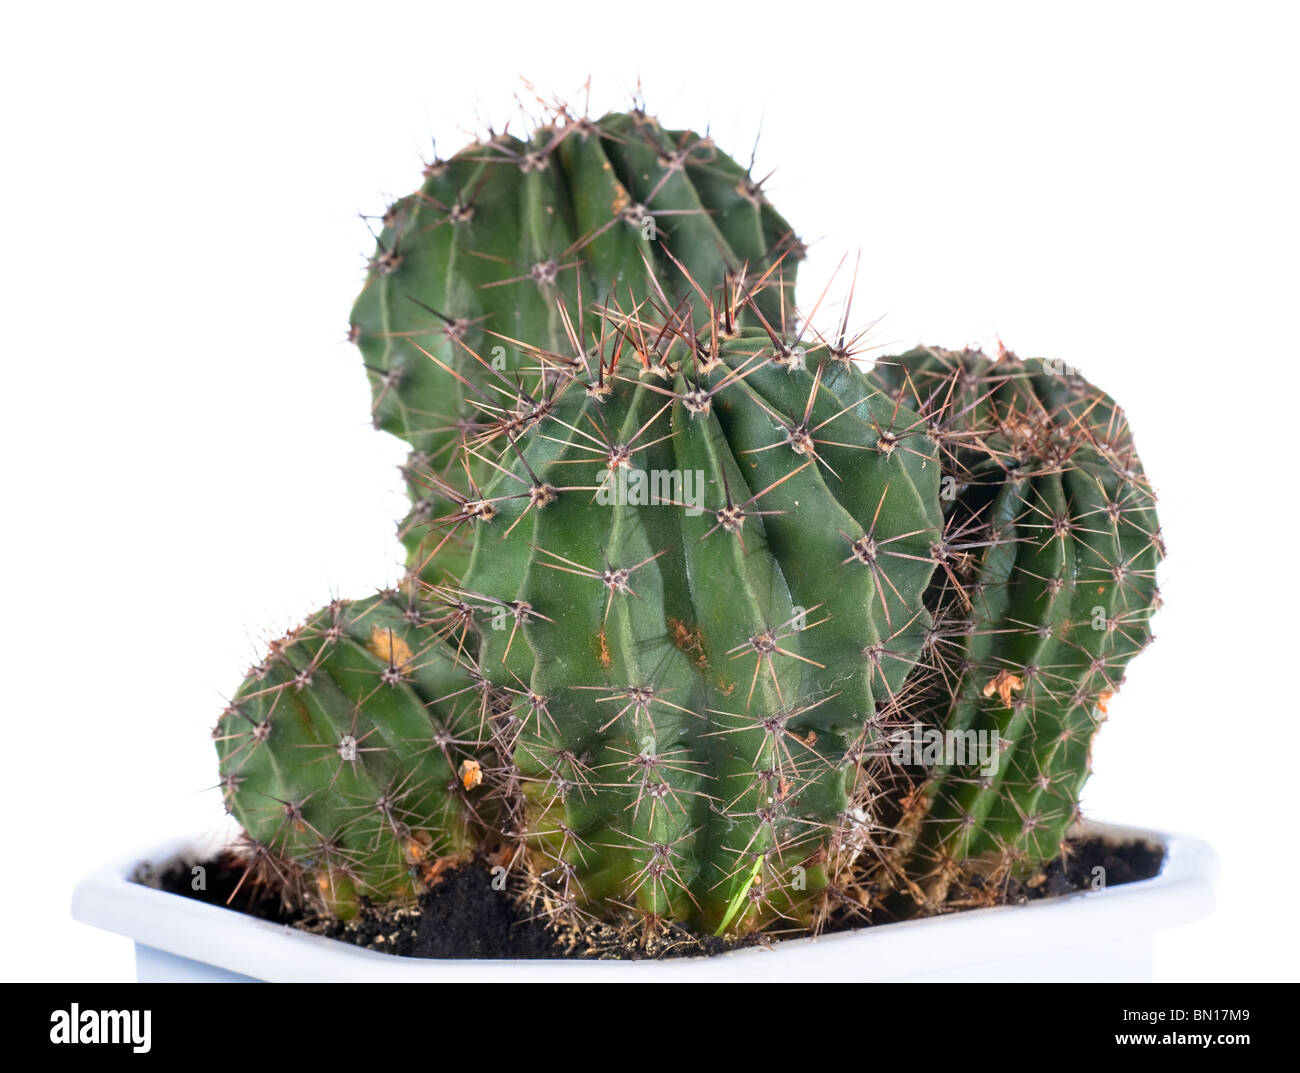 Thorny potted home Barrel cactus plant isolated on white. Stock Photo